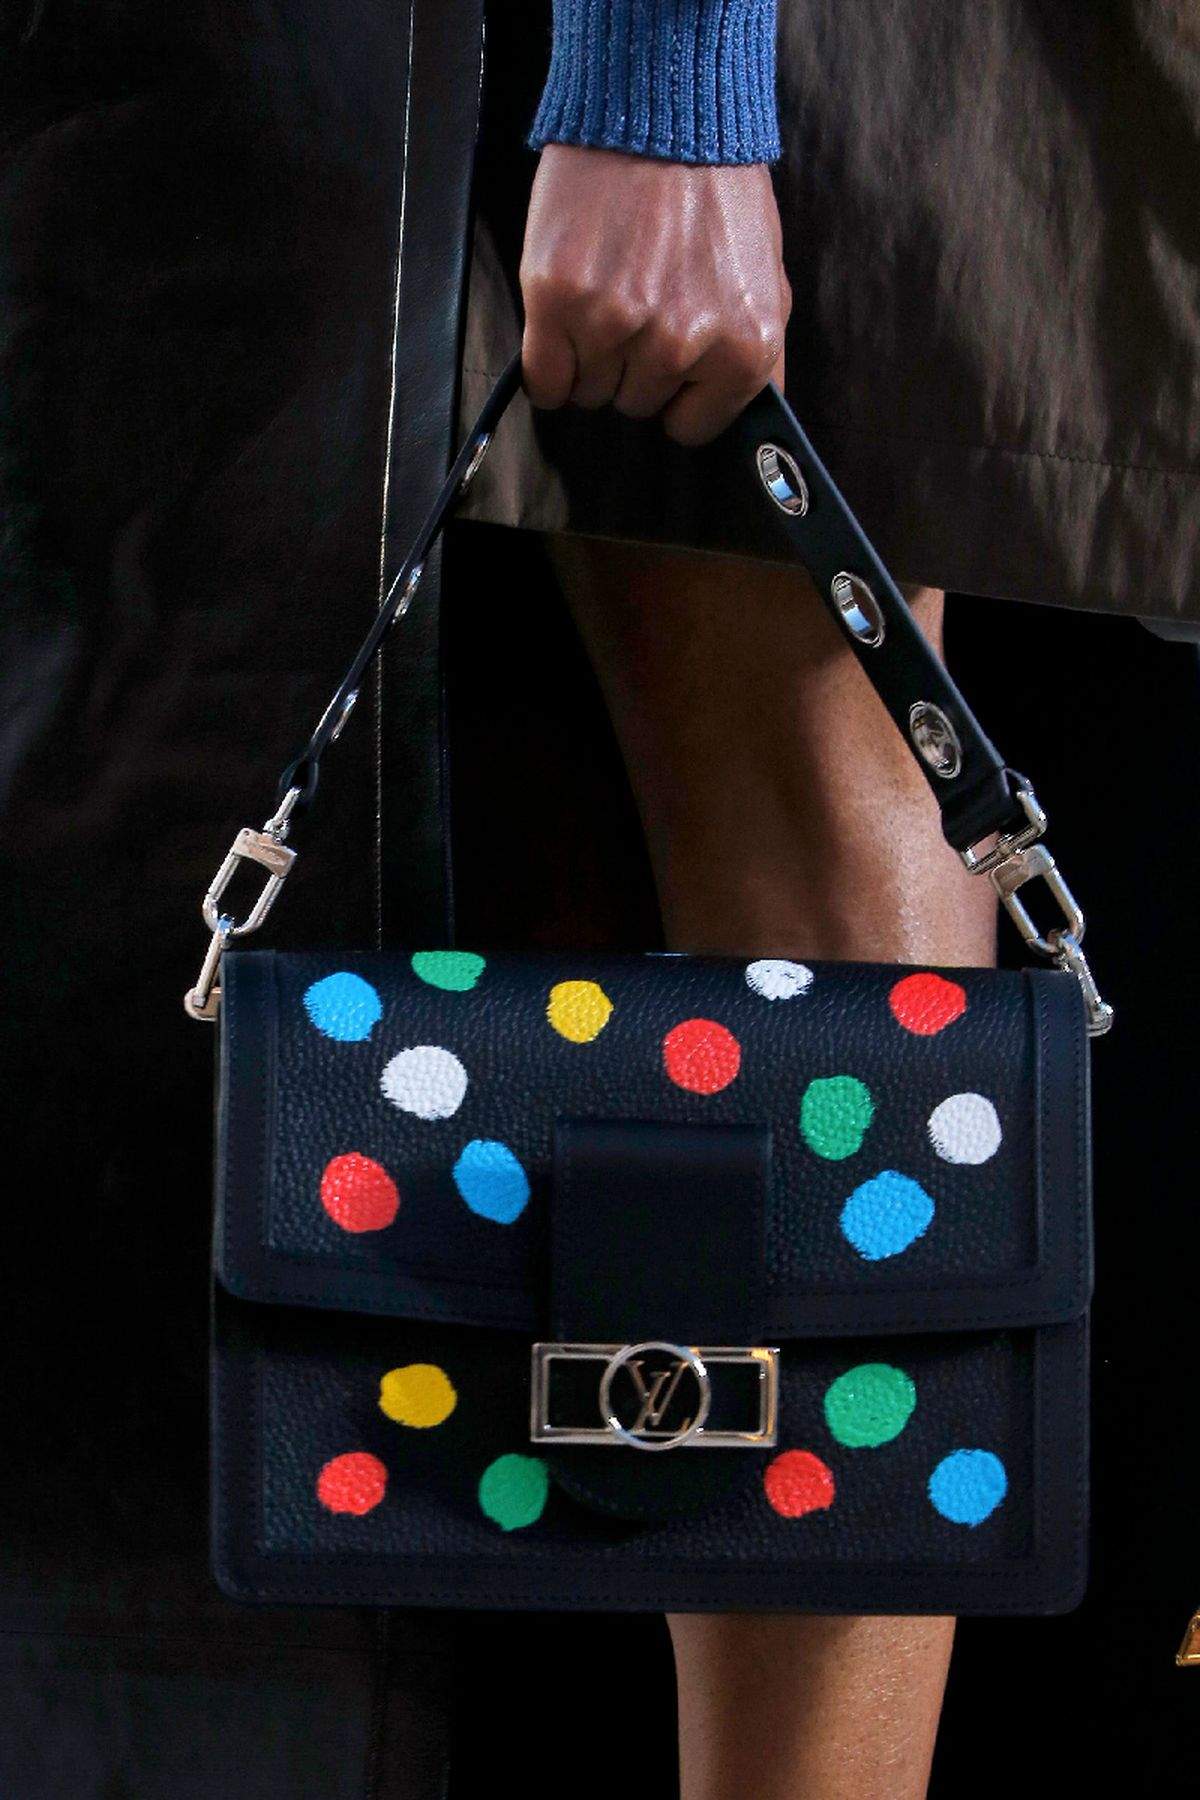 Yayoi Kusama and Louis Vuitton have joined hands for an exclusive collection  of dotted bags - Luxurylaunches